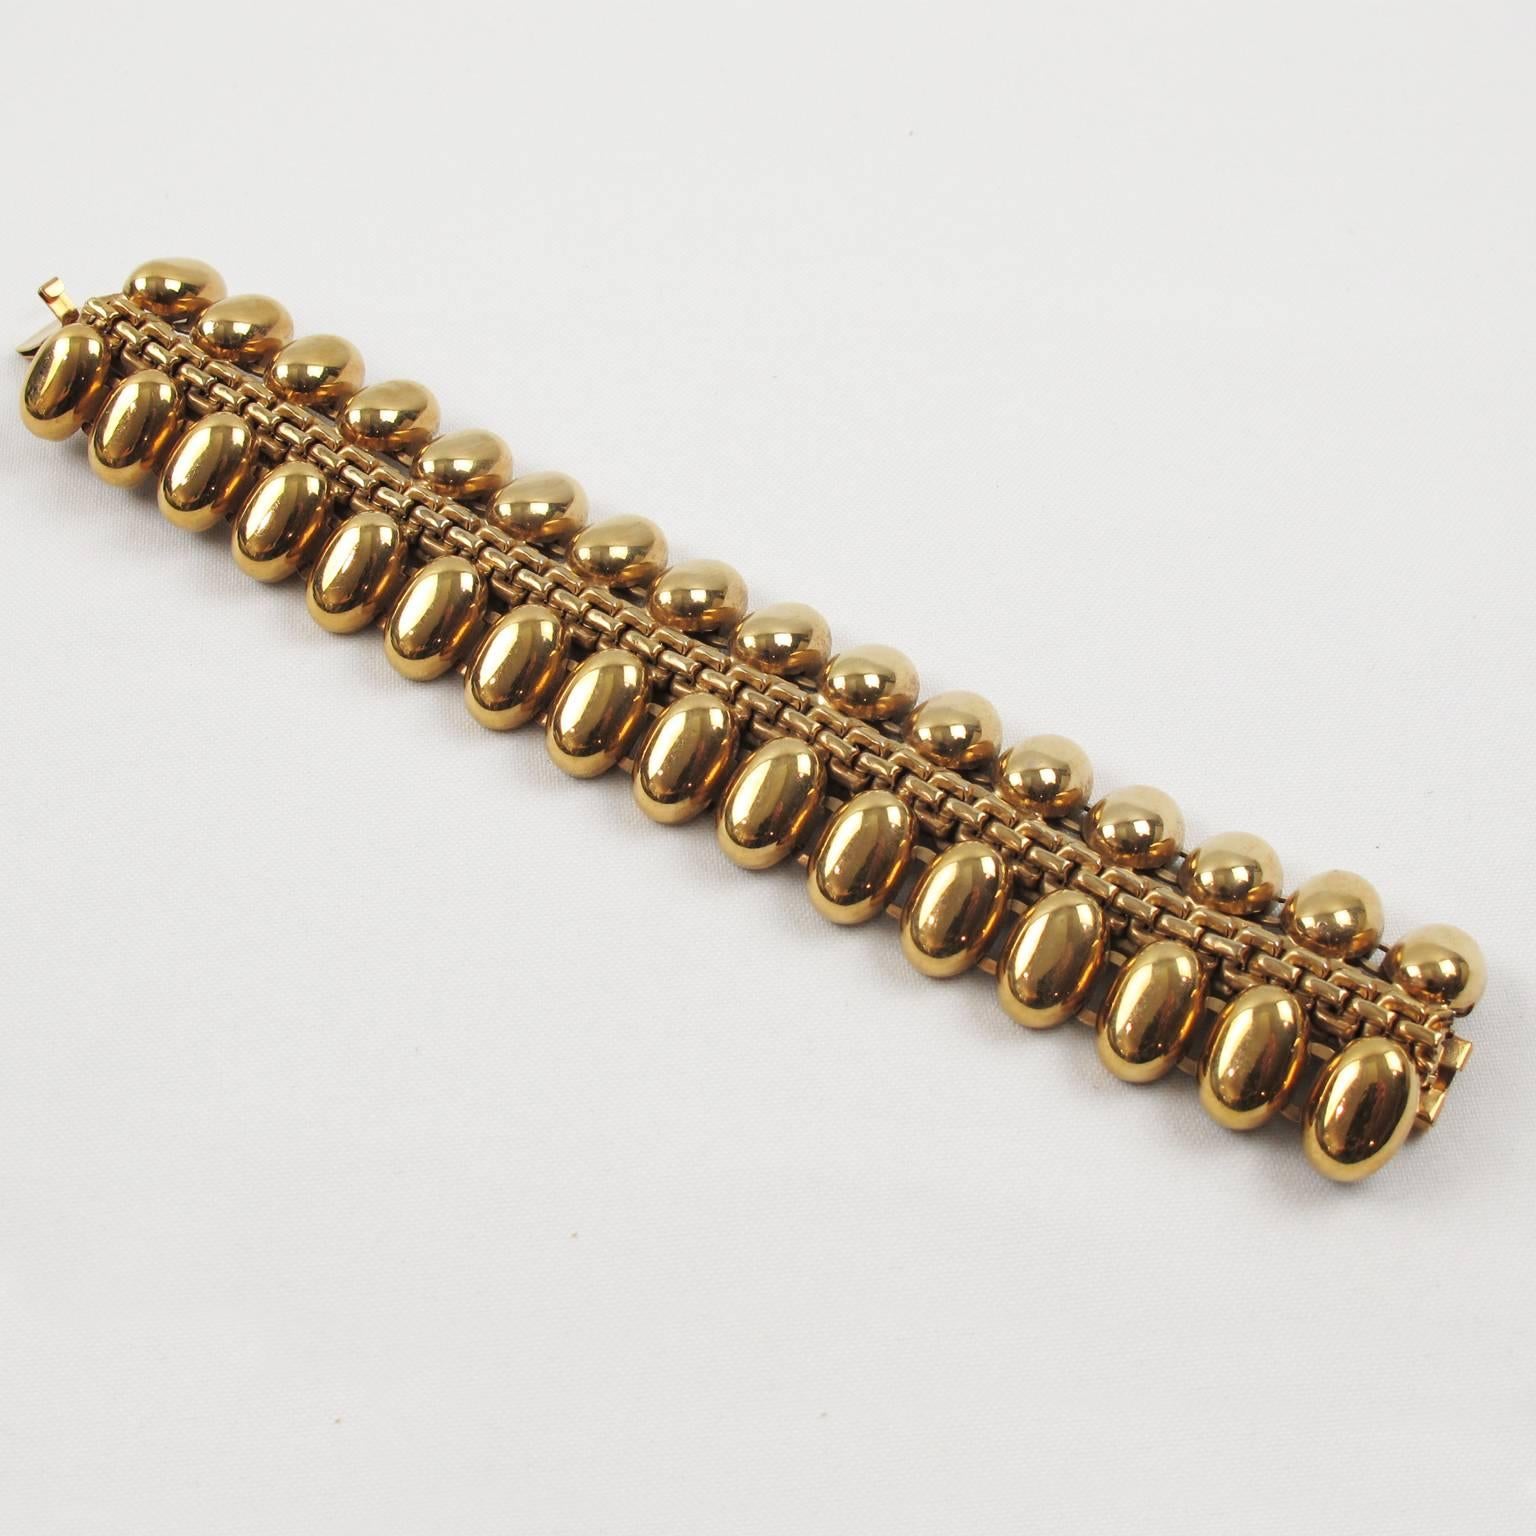 1940s French retro Tank bracelet of oversized gilt metal links. Distinct Machine Age design, the high polish of the gilded metal gives this piece of jewelry a true 3 dimensional look. Architectural heavy geometric shape is typical of the machine